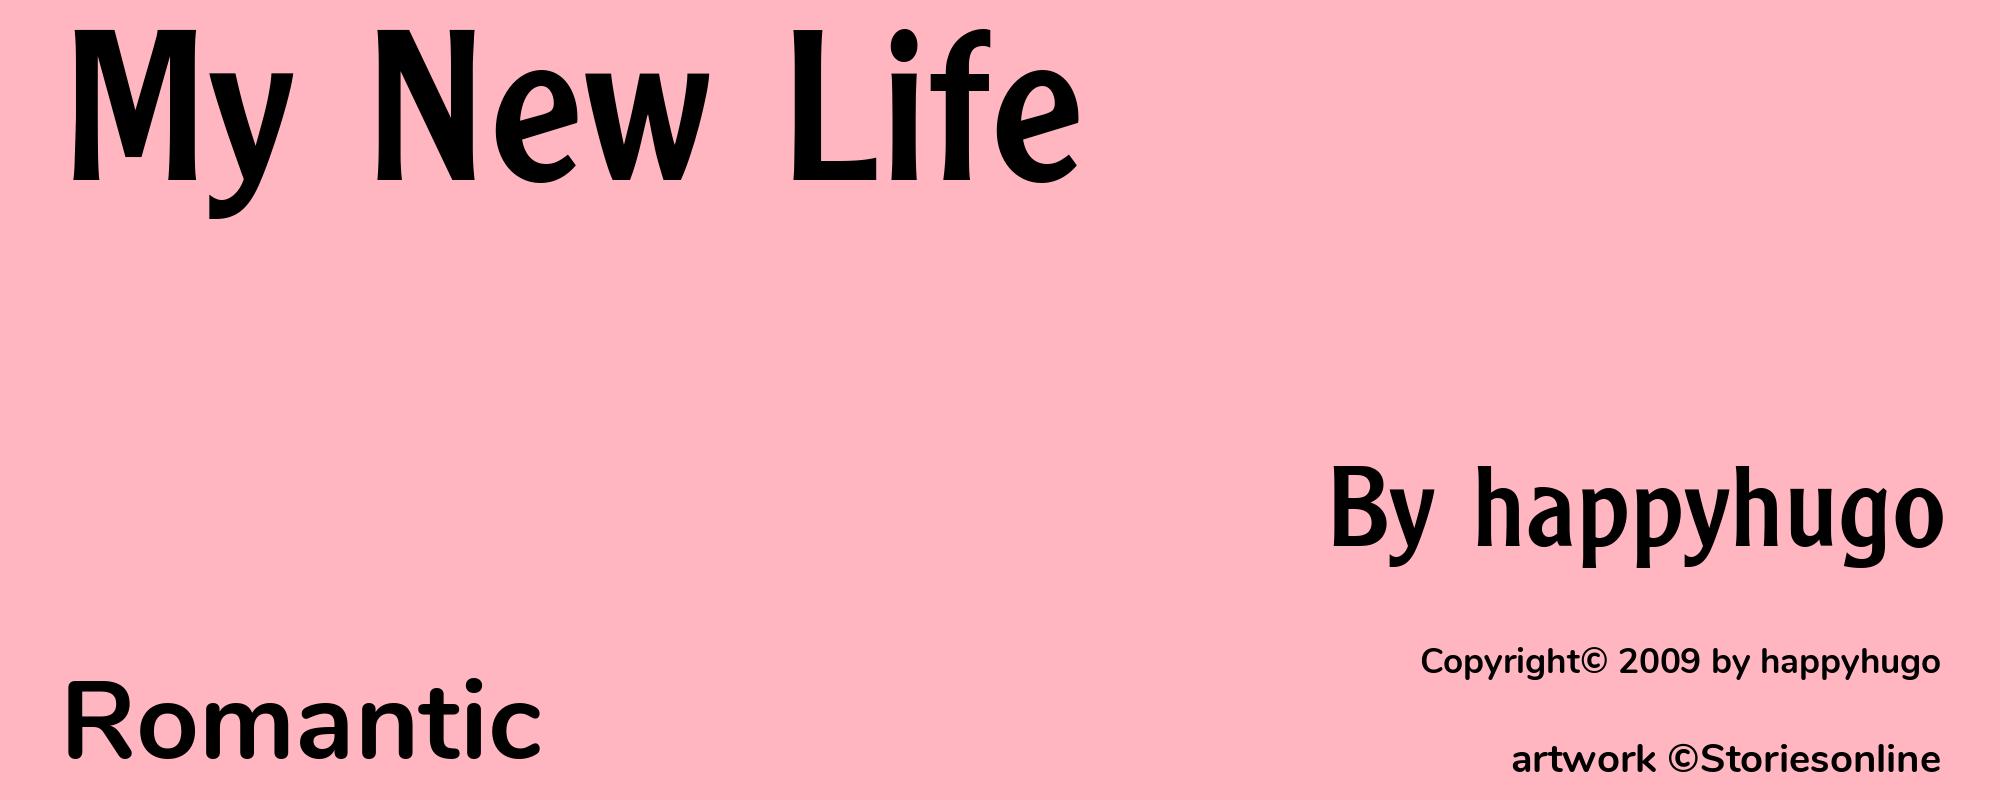 My New Life - Cover